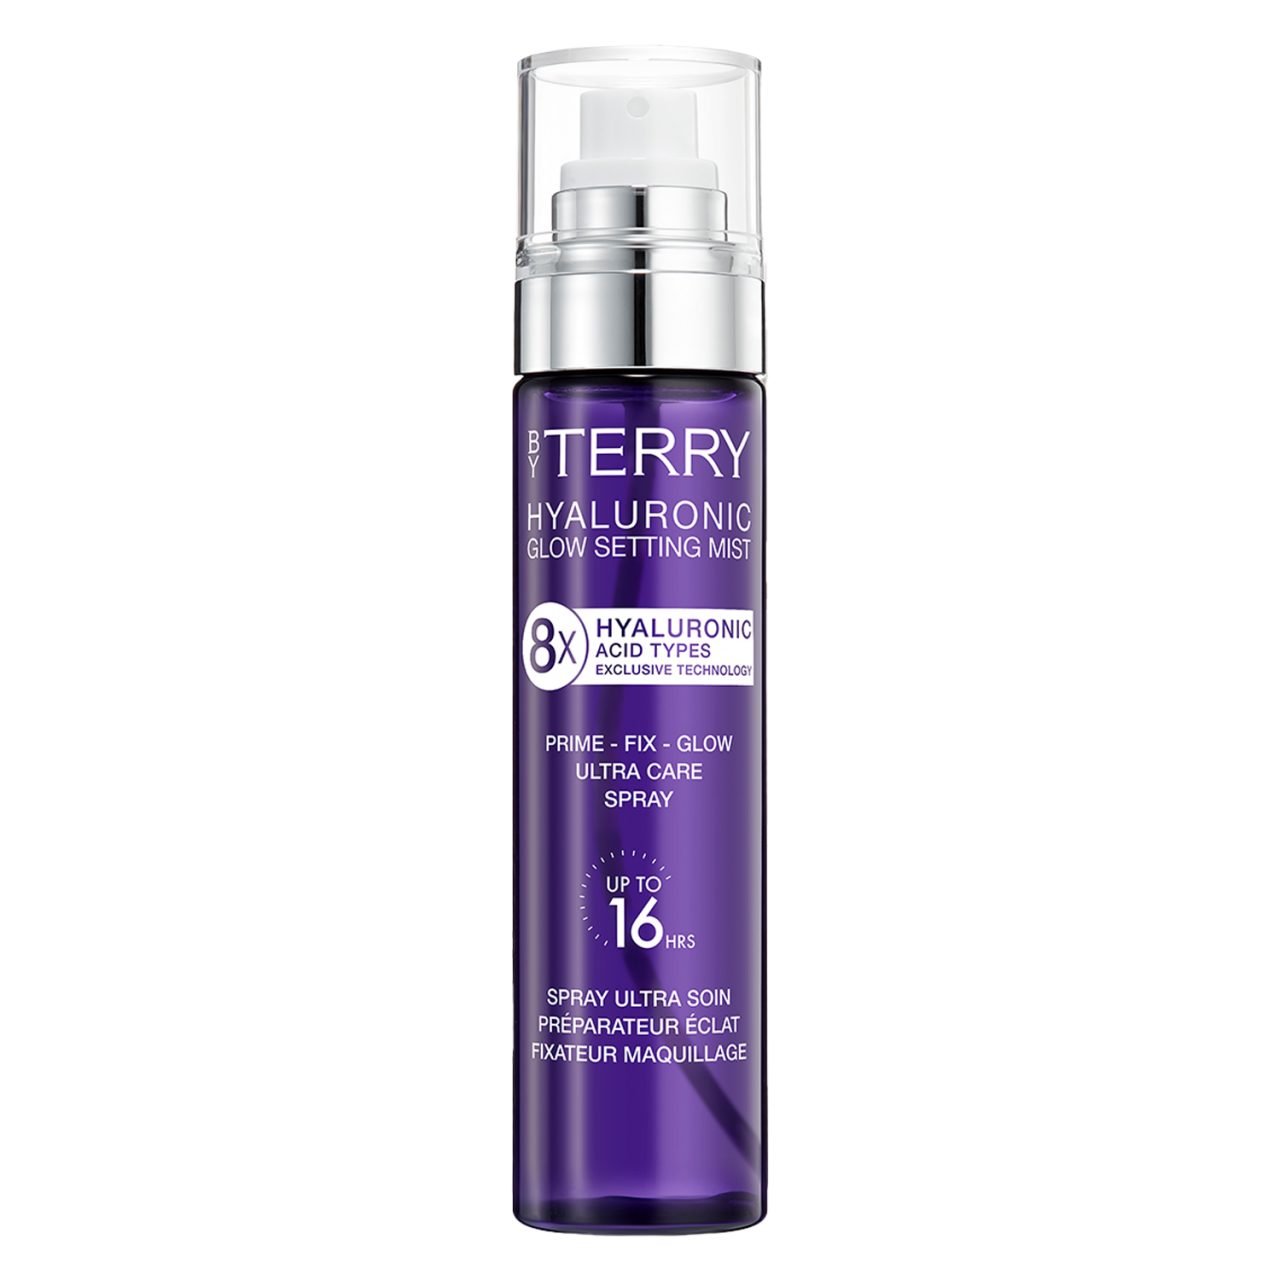 By Terry Primer - Hyaluronic Global Setting Mist Spray von BY TERRY